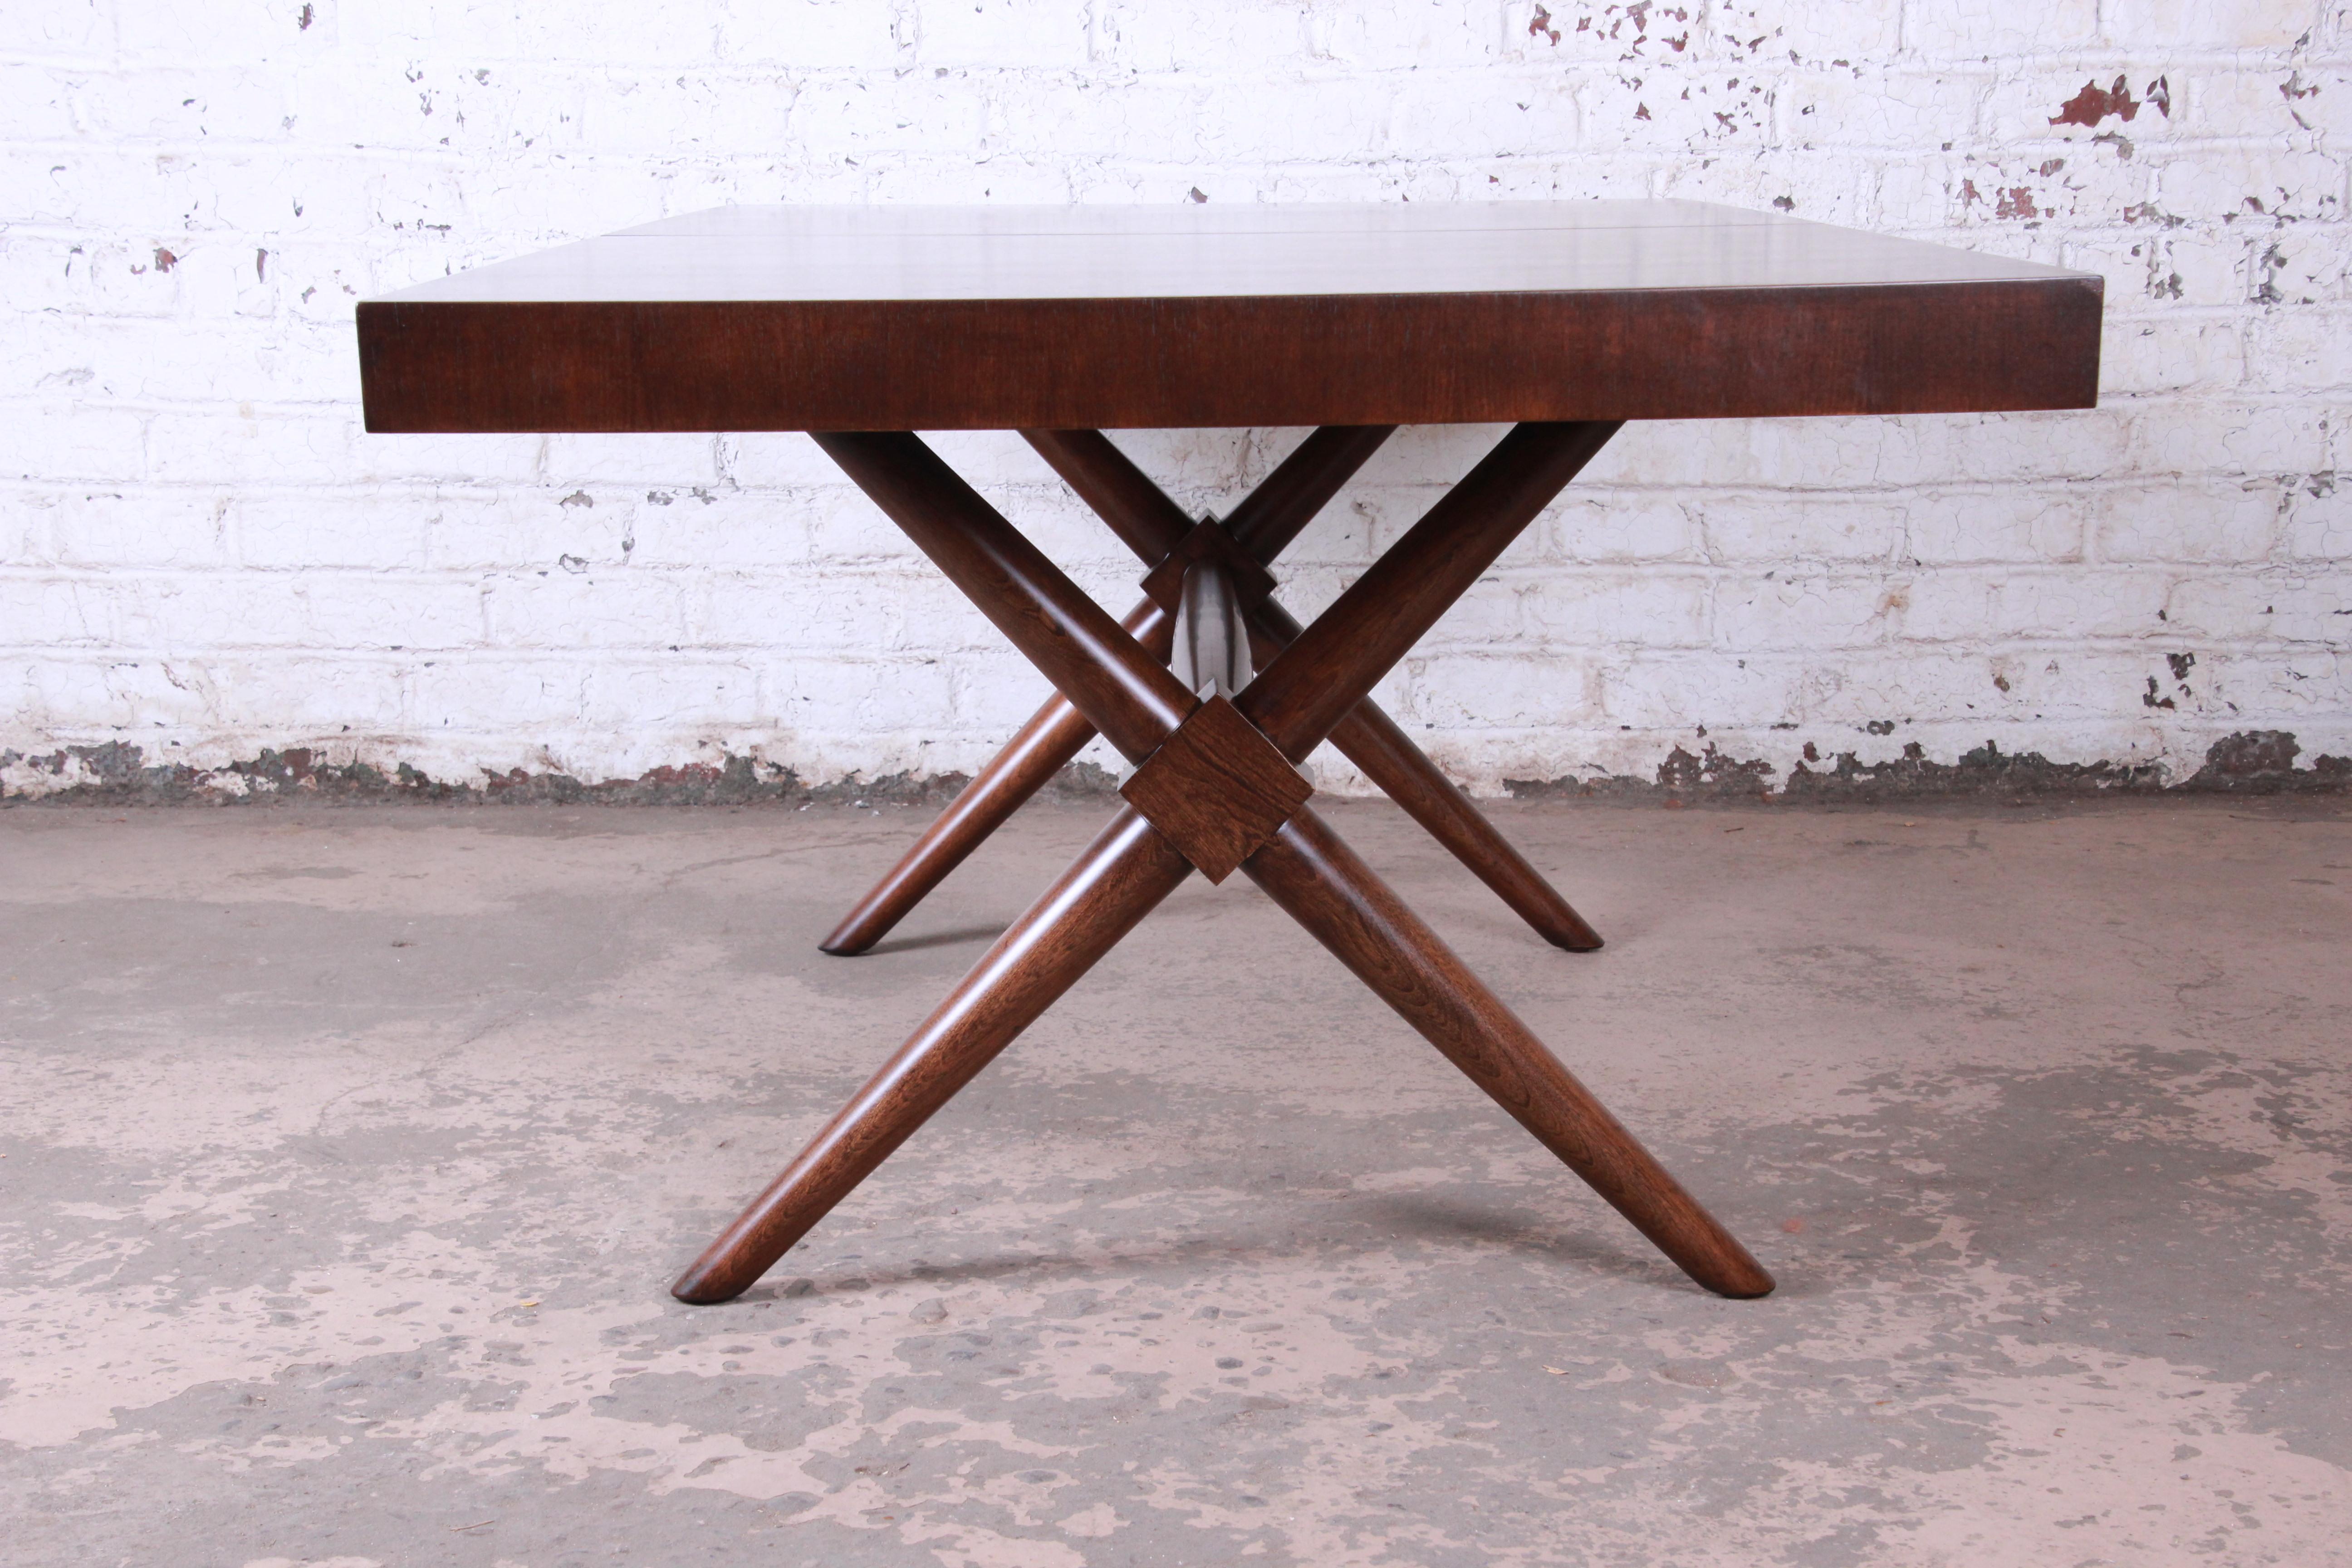 An exceptional Mid-Century Modern X-base walnut dining table designed by T.H. Robsjohn-Gibbings for Widdicomb. The table features an iconic x-base design and stunning walnut wood grain. It measures 72